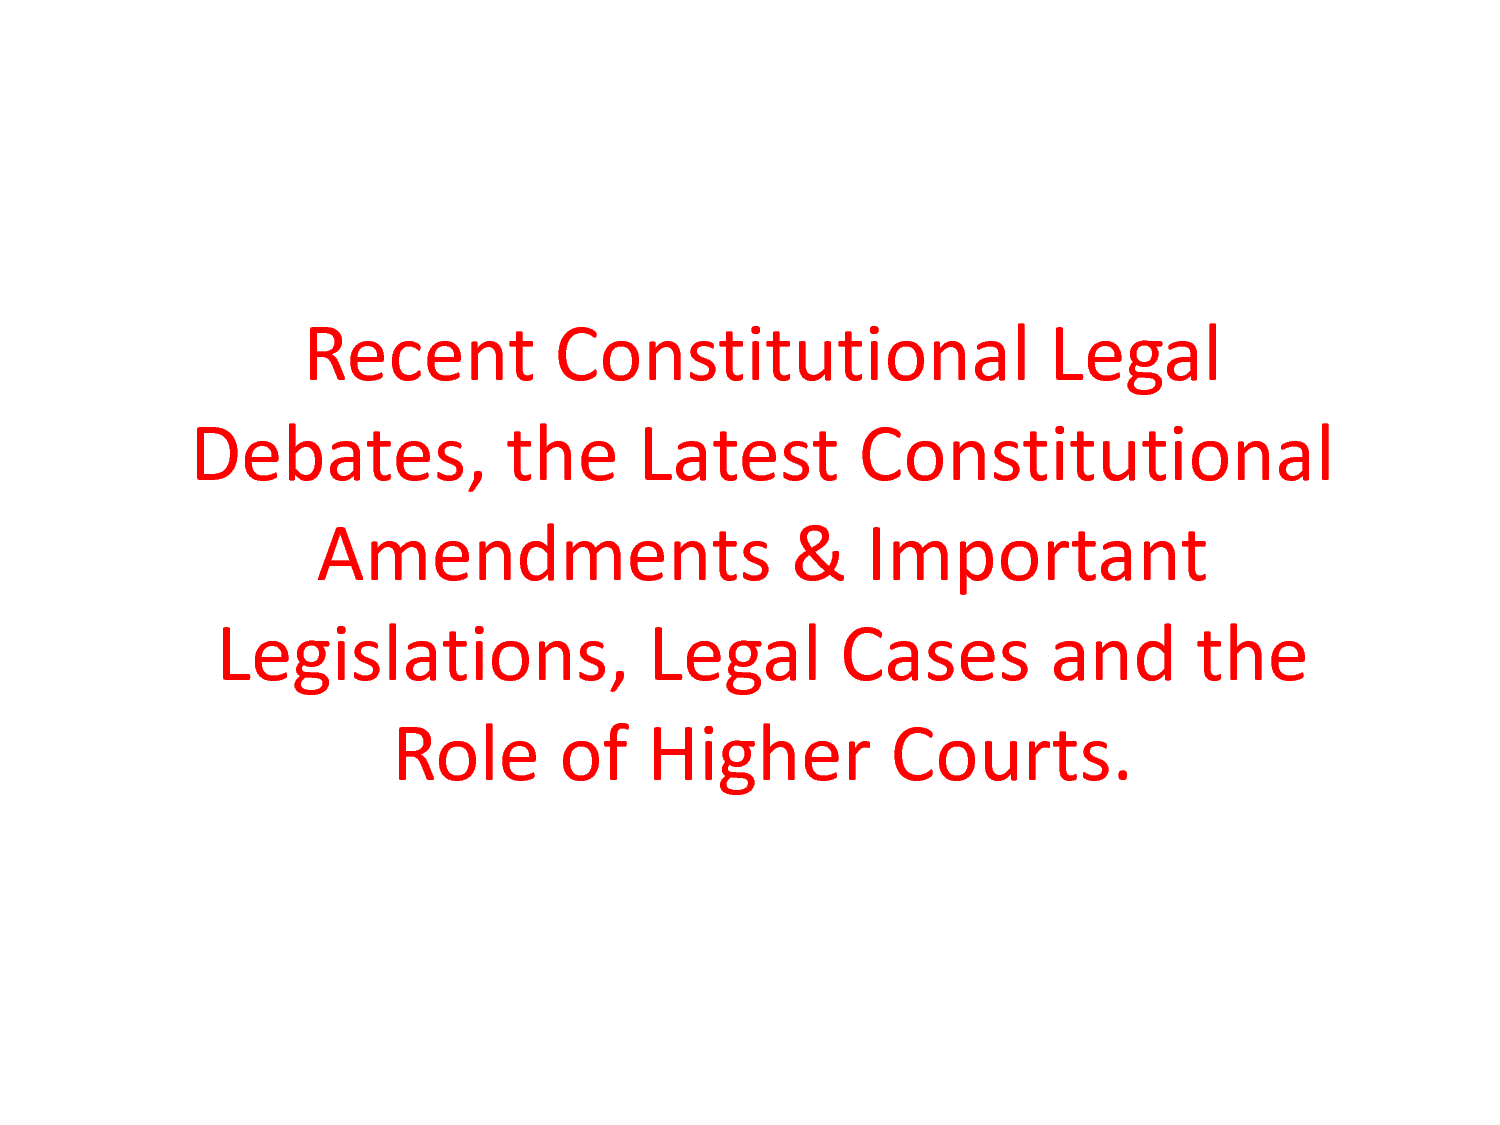 Xxvii. the recent constitutional and legal debates, the latest constitutional amendments and important legislations, legal cases and the role of higher courts.